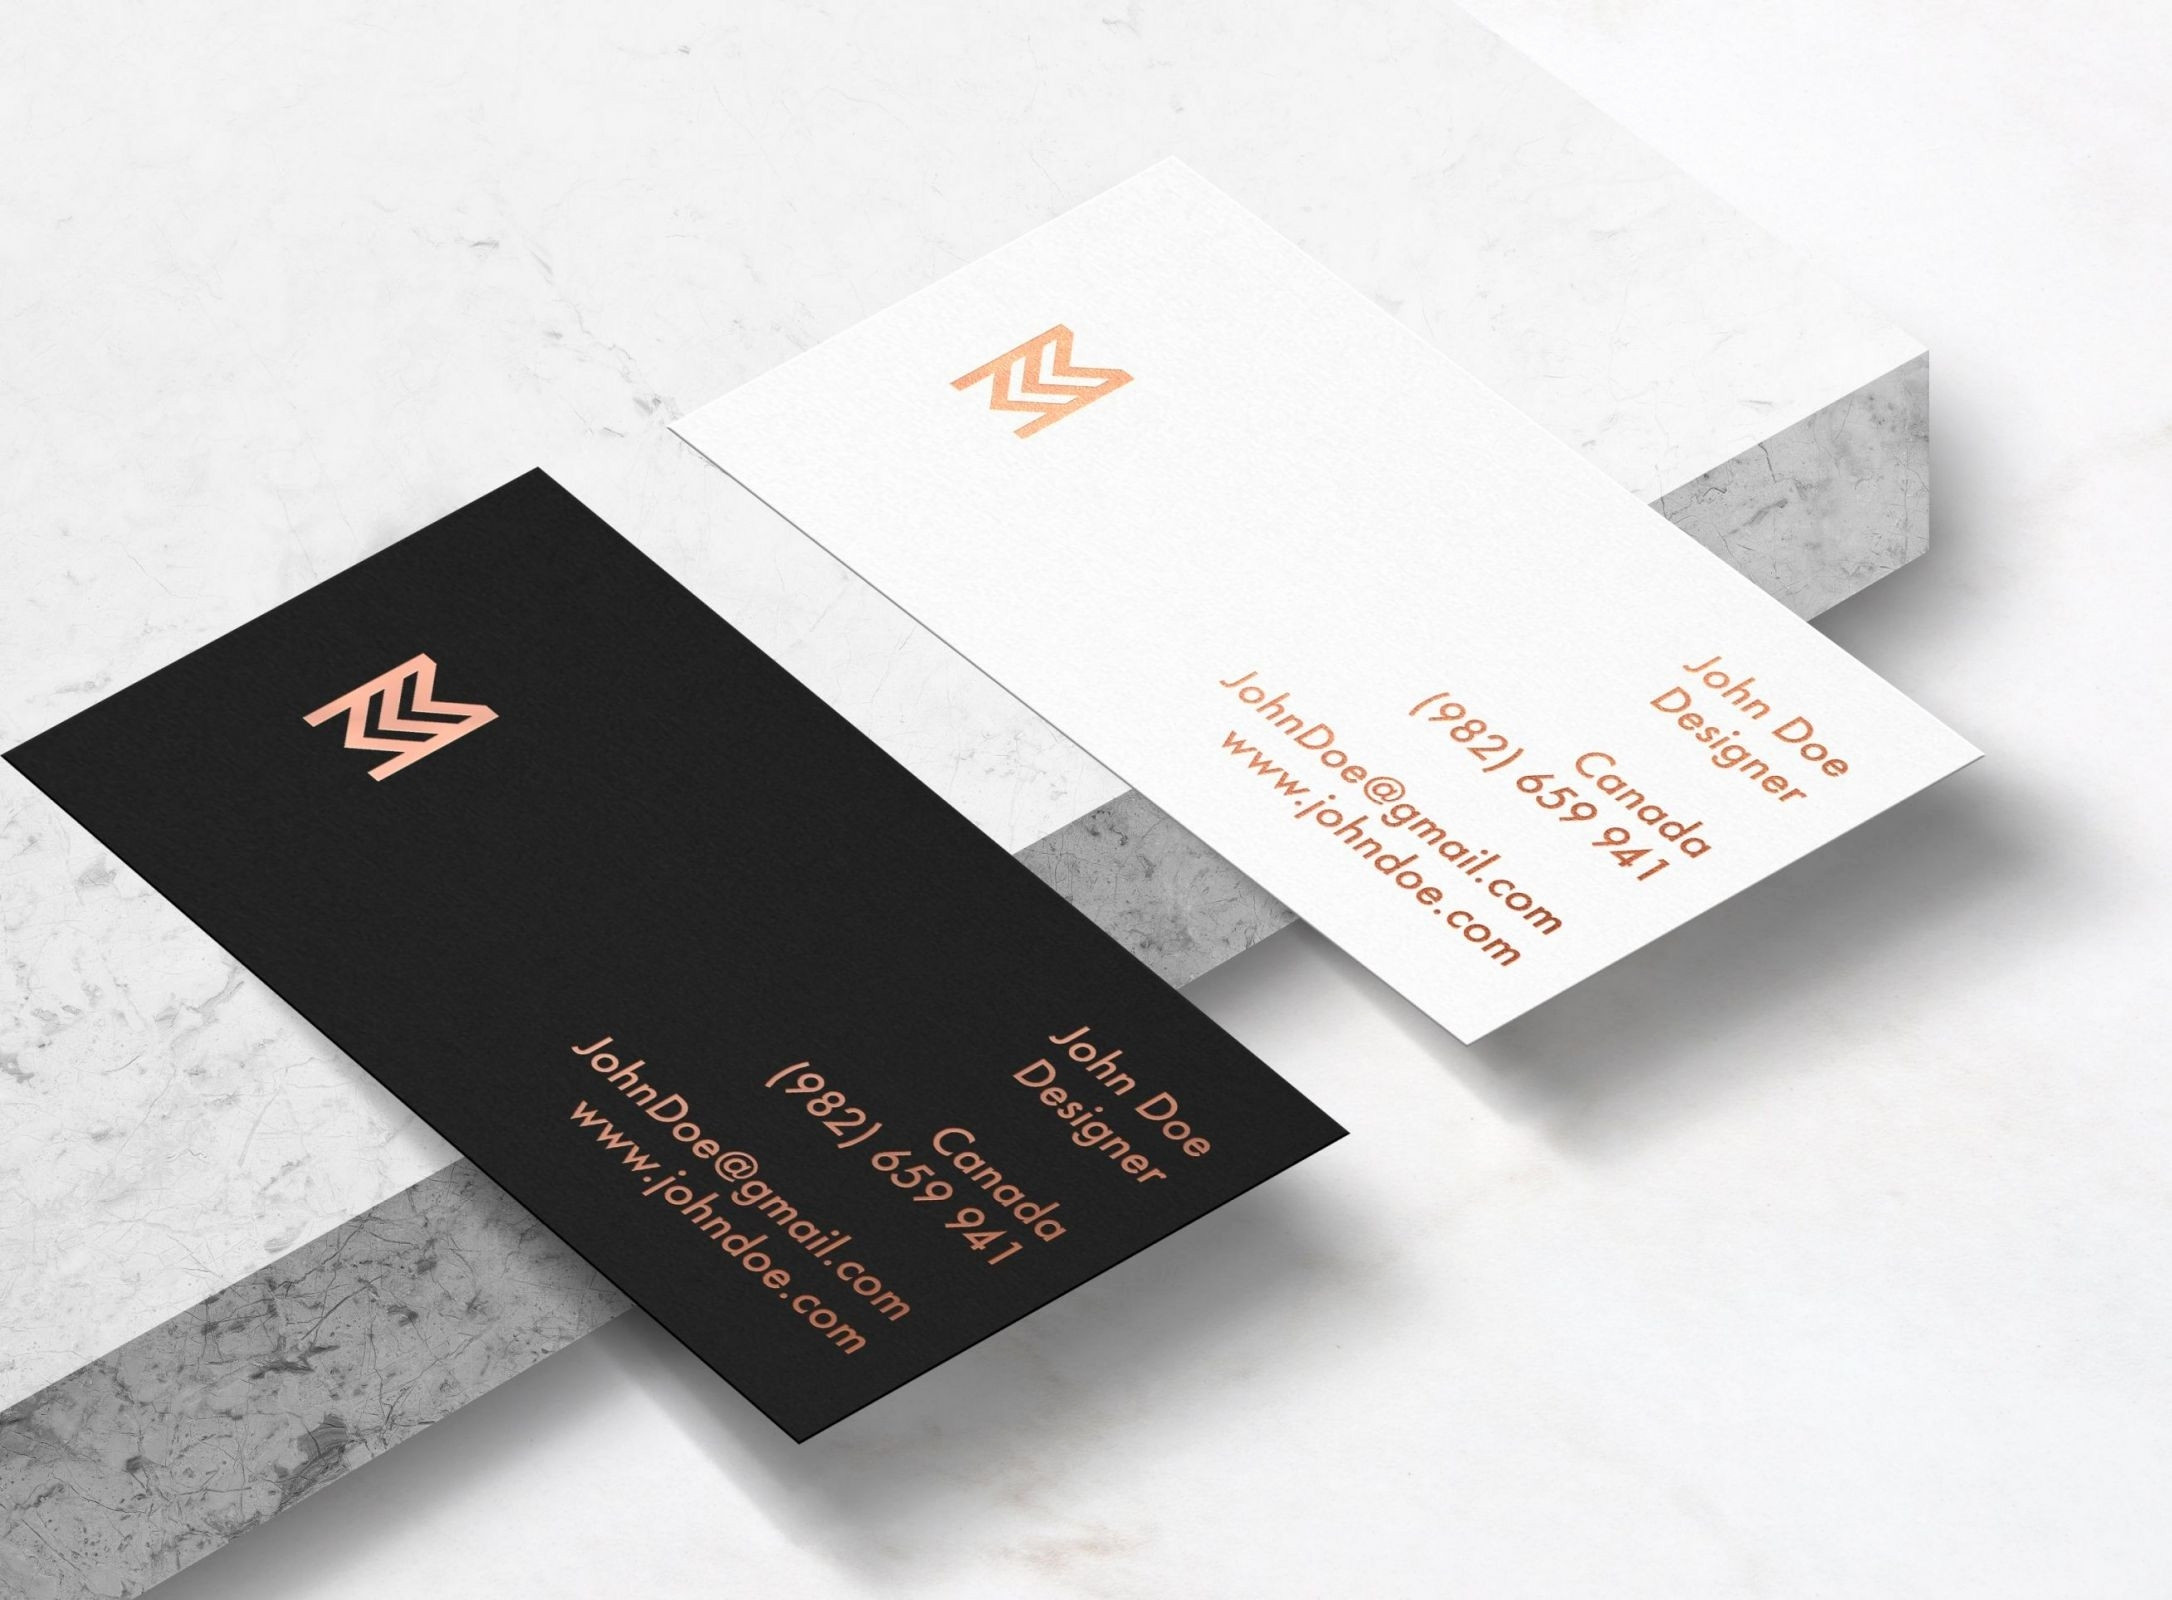 Hairdressing Business Cards Ideas Beauty Salon Designs Of Hairdresser Business Card Templates Free